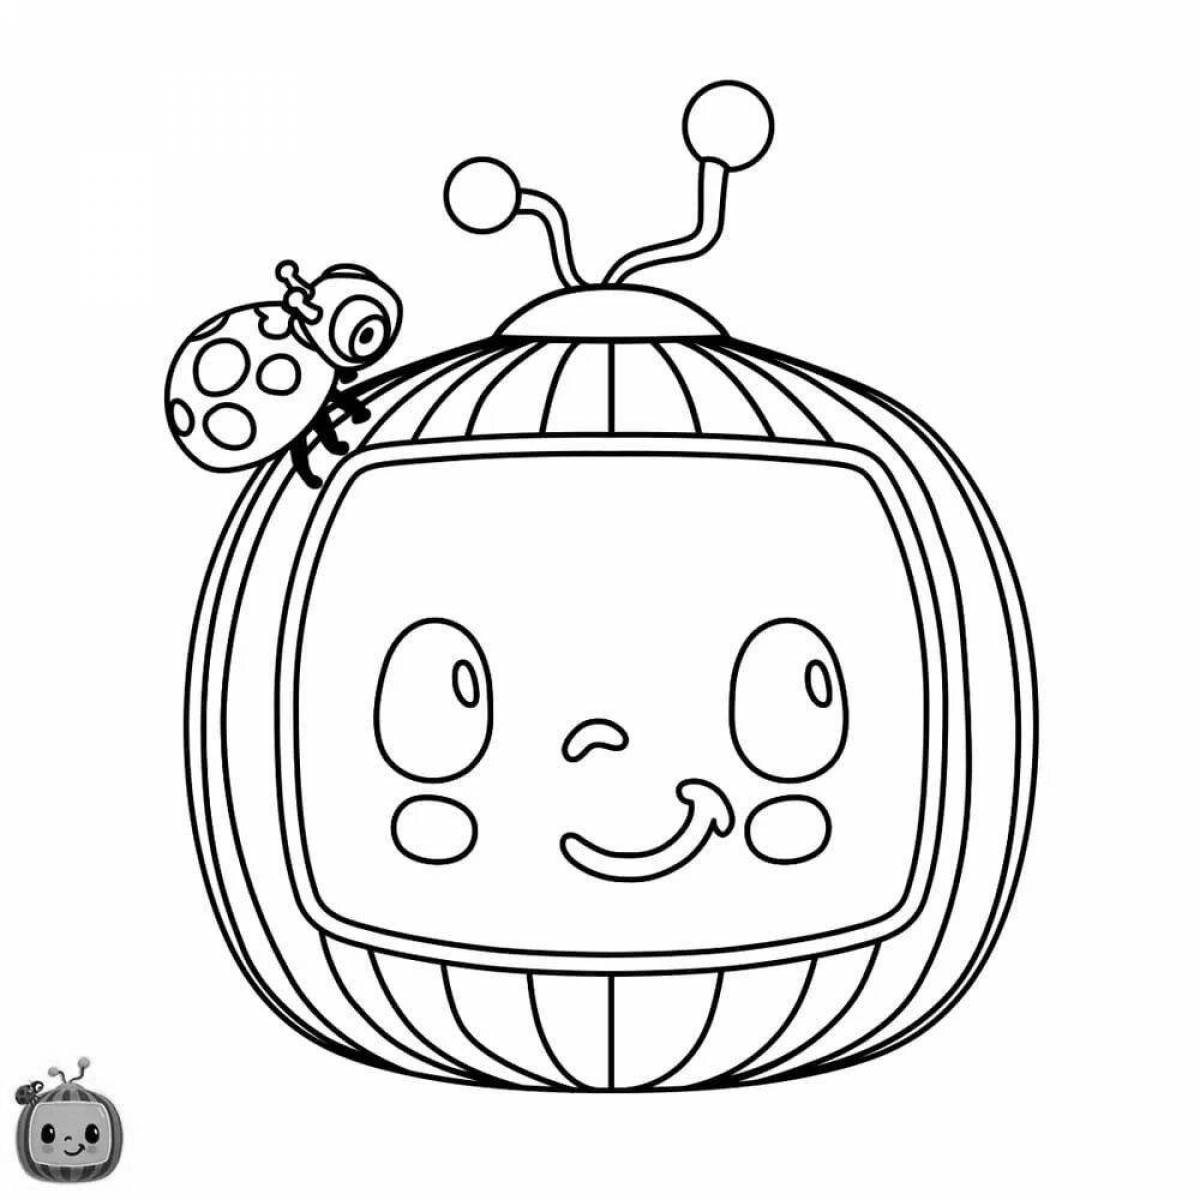 Lovely cocomelone coloring page